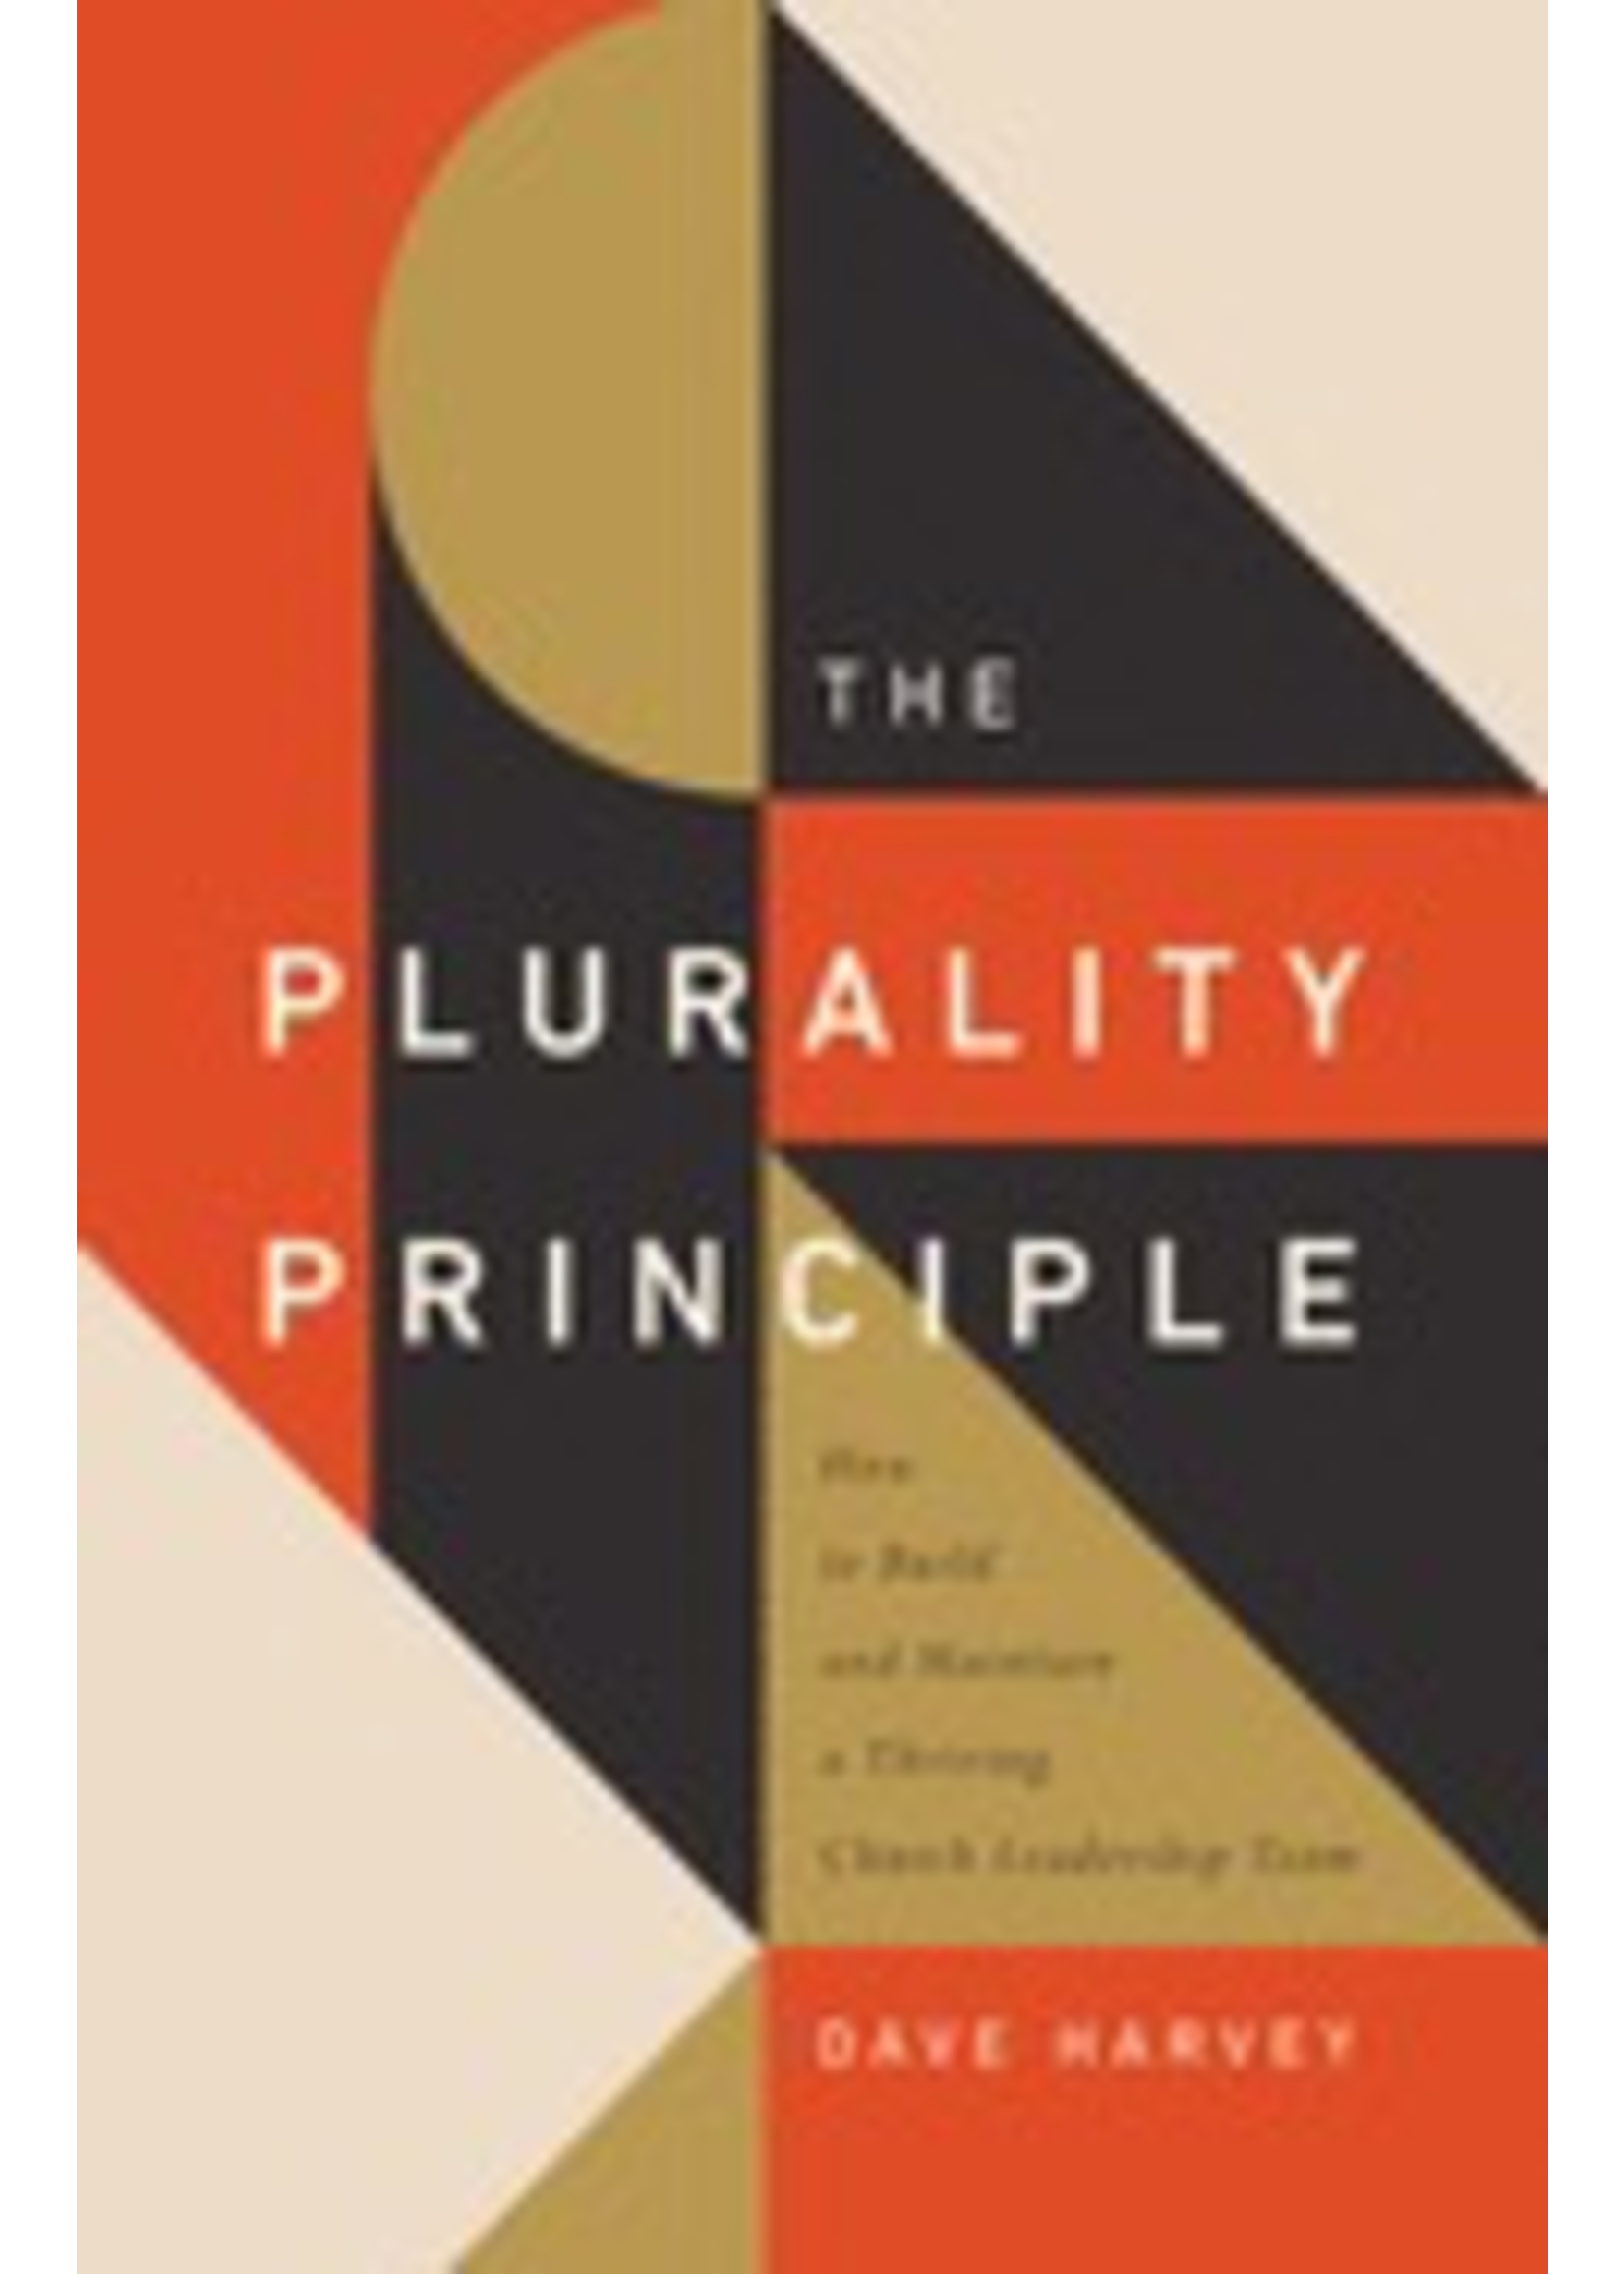 archived The Plurality Principle: How to Build and Maintain a Thriving Church Leadership Team [Dave Harvey]